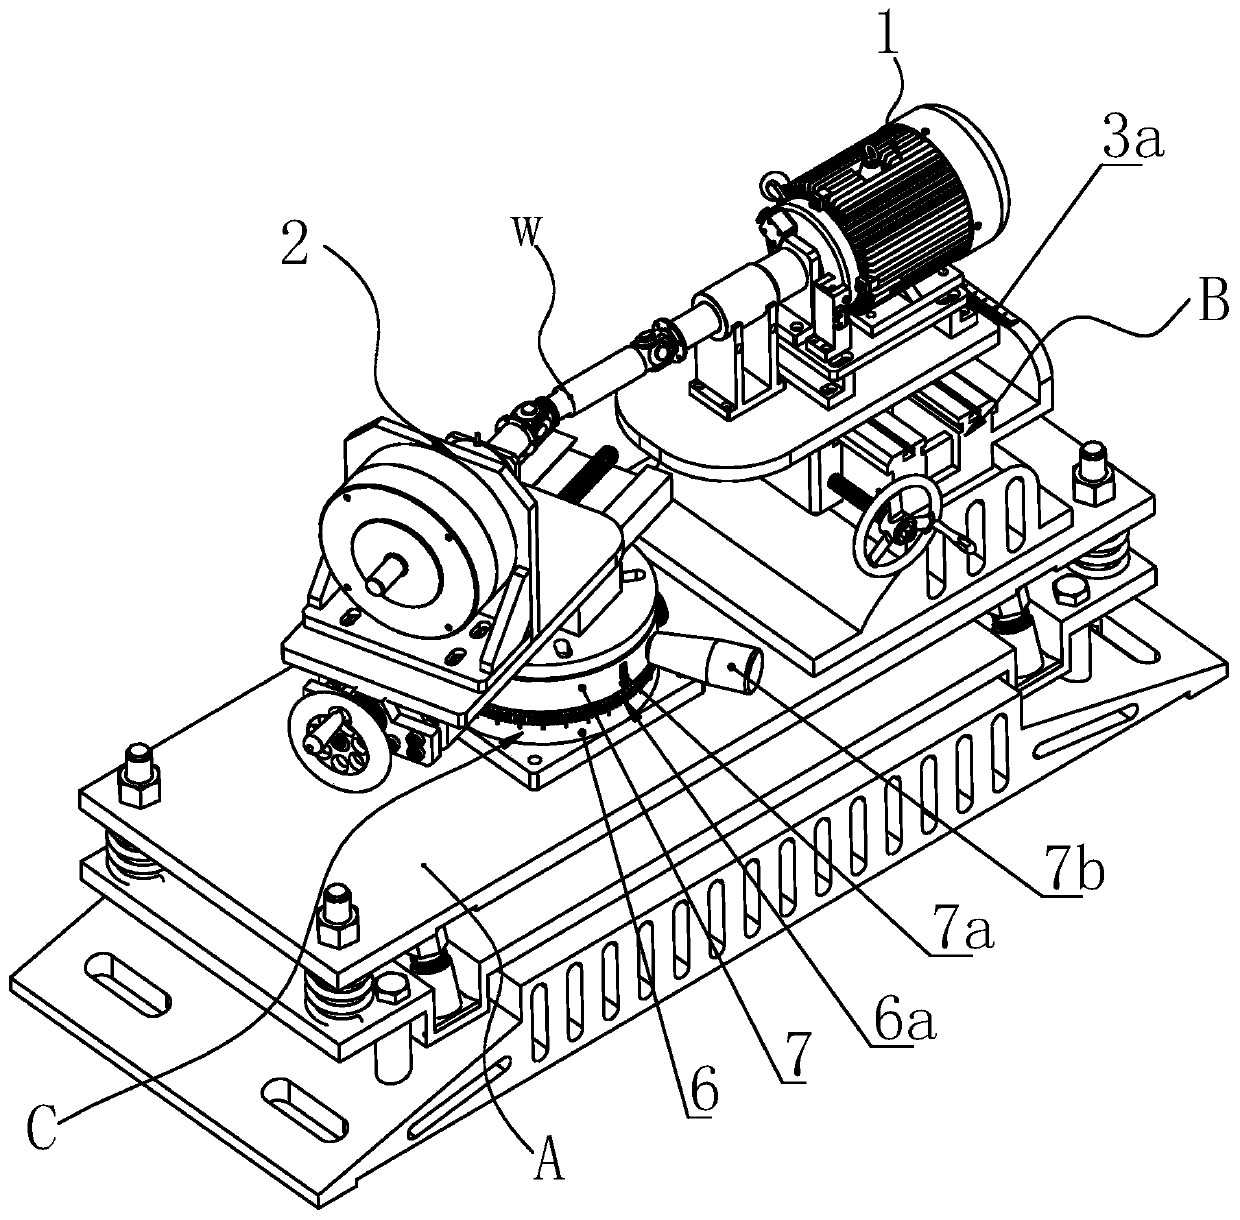 Service life detecting device of coupler